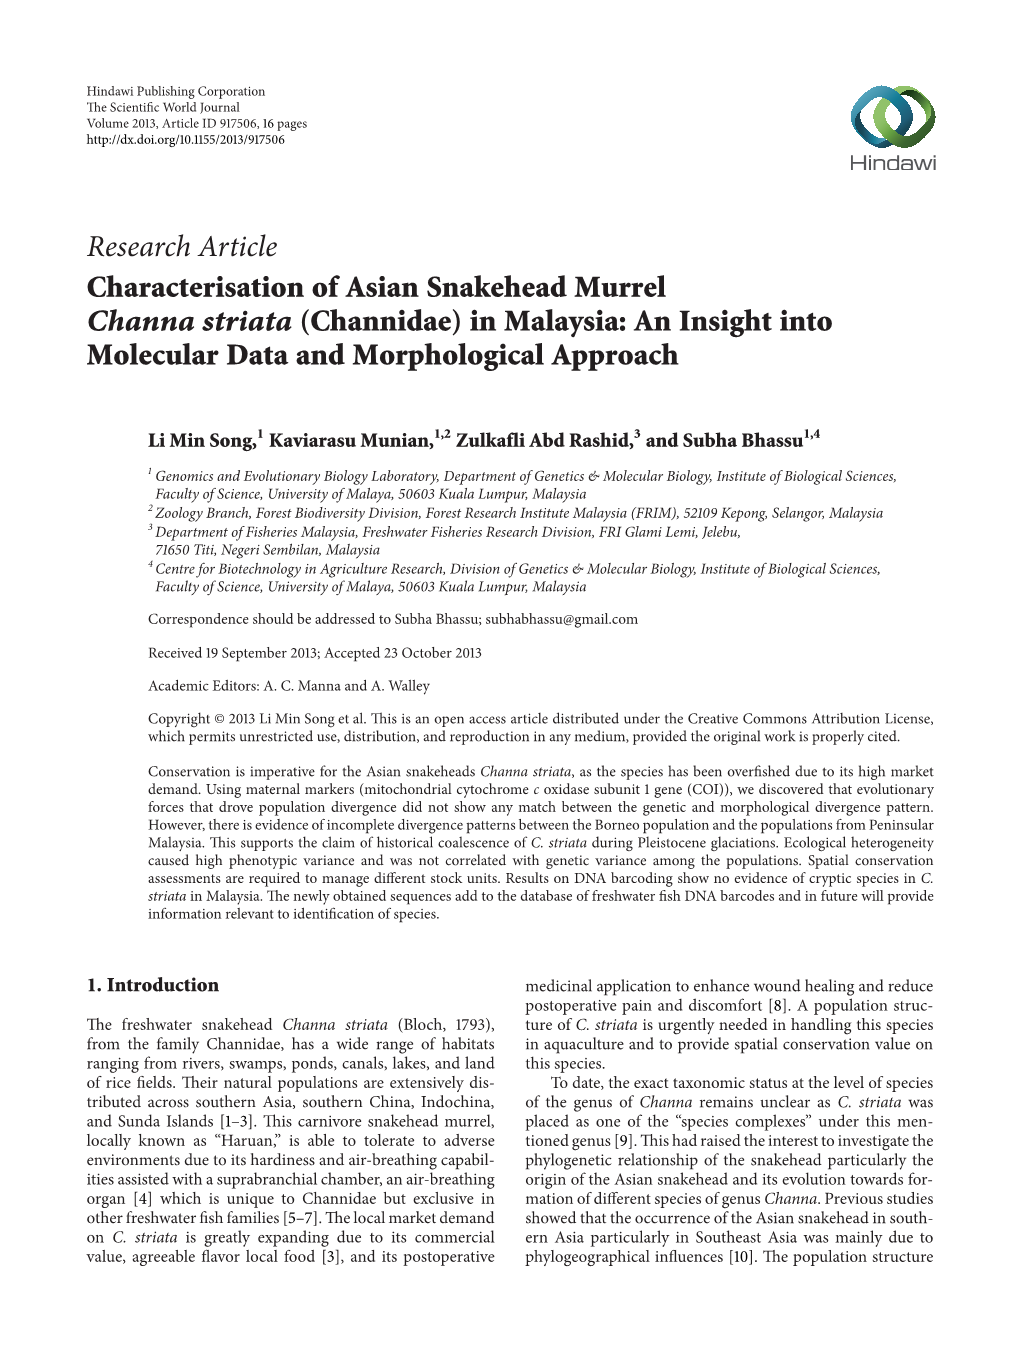 Characterisation of Asian Snakehead Murrel Channa Striata (Channidae) in Malaysia: an Insight Into Molecular Data and Morphological Approach